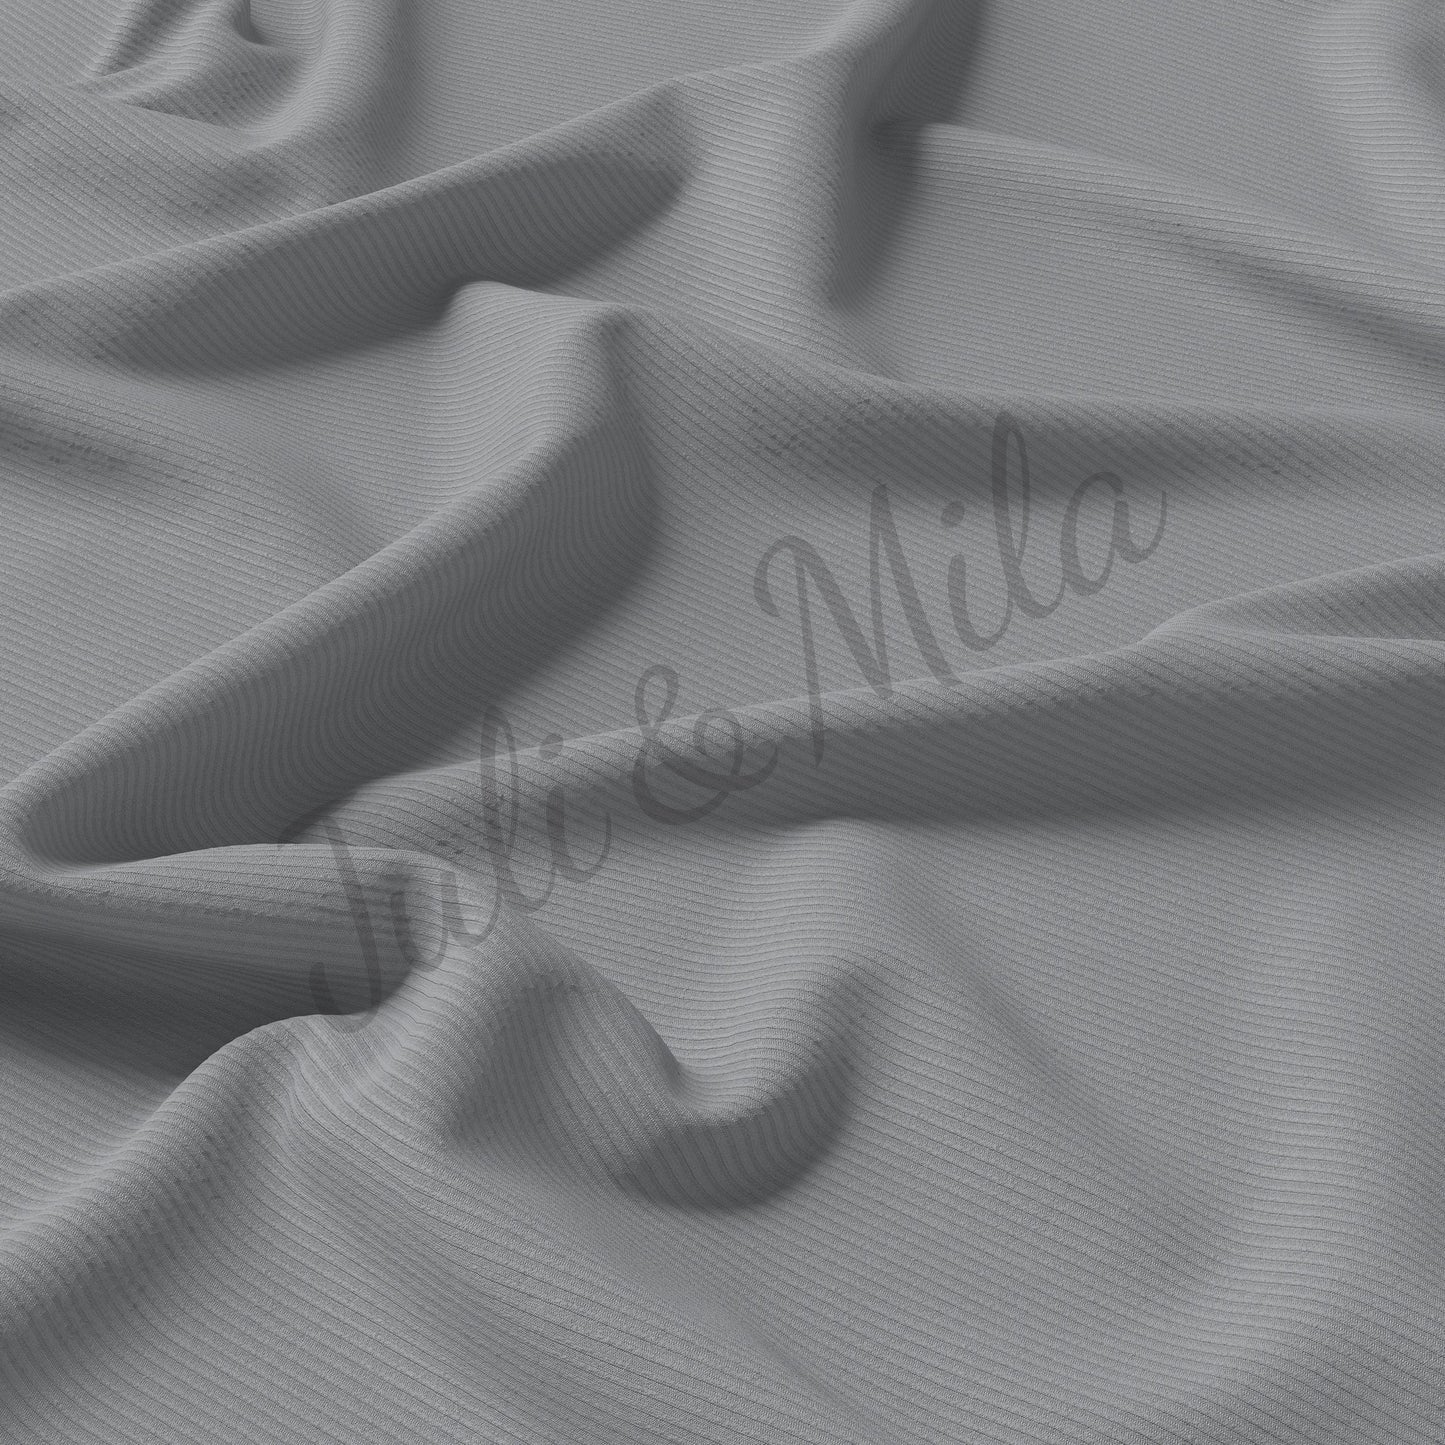 Ultimate Gray Rib Knit Fabric by the Yard Ribbed Jersey Stretchy Soft Polyester Stretch Fabric 1 Yard